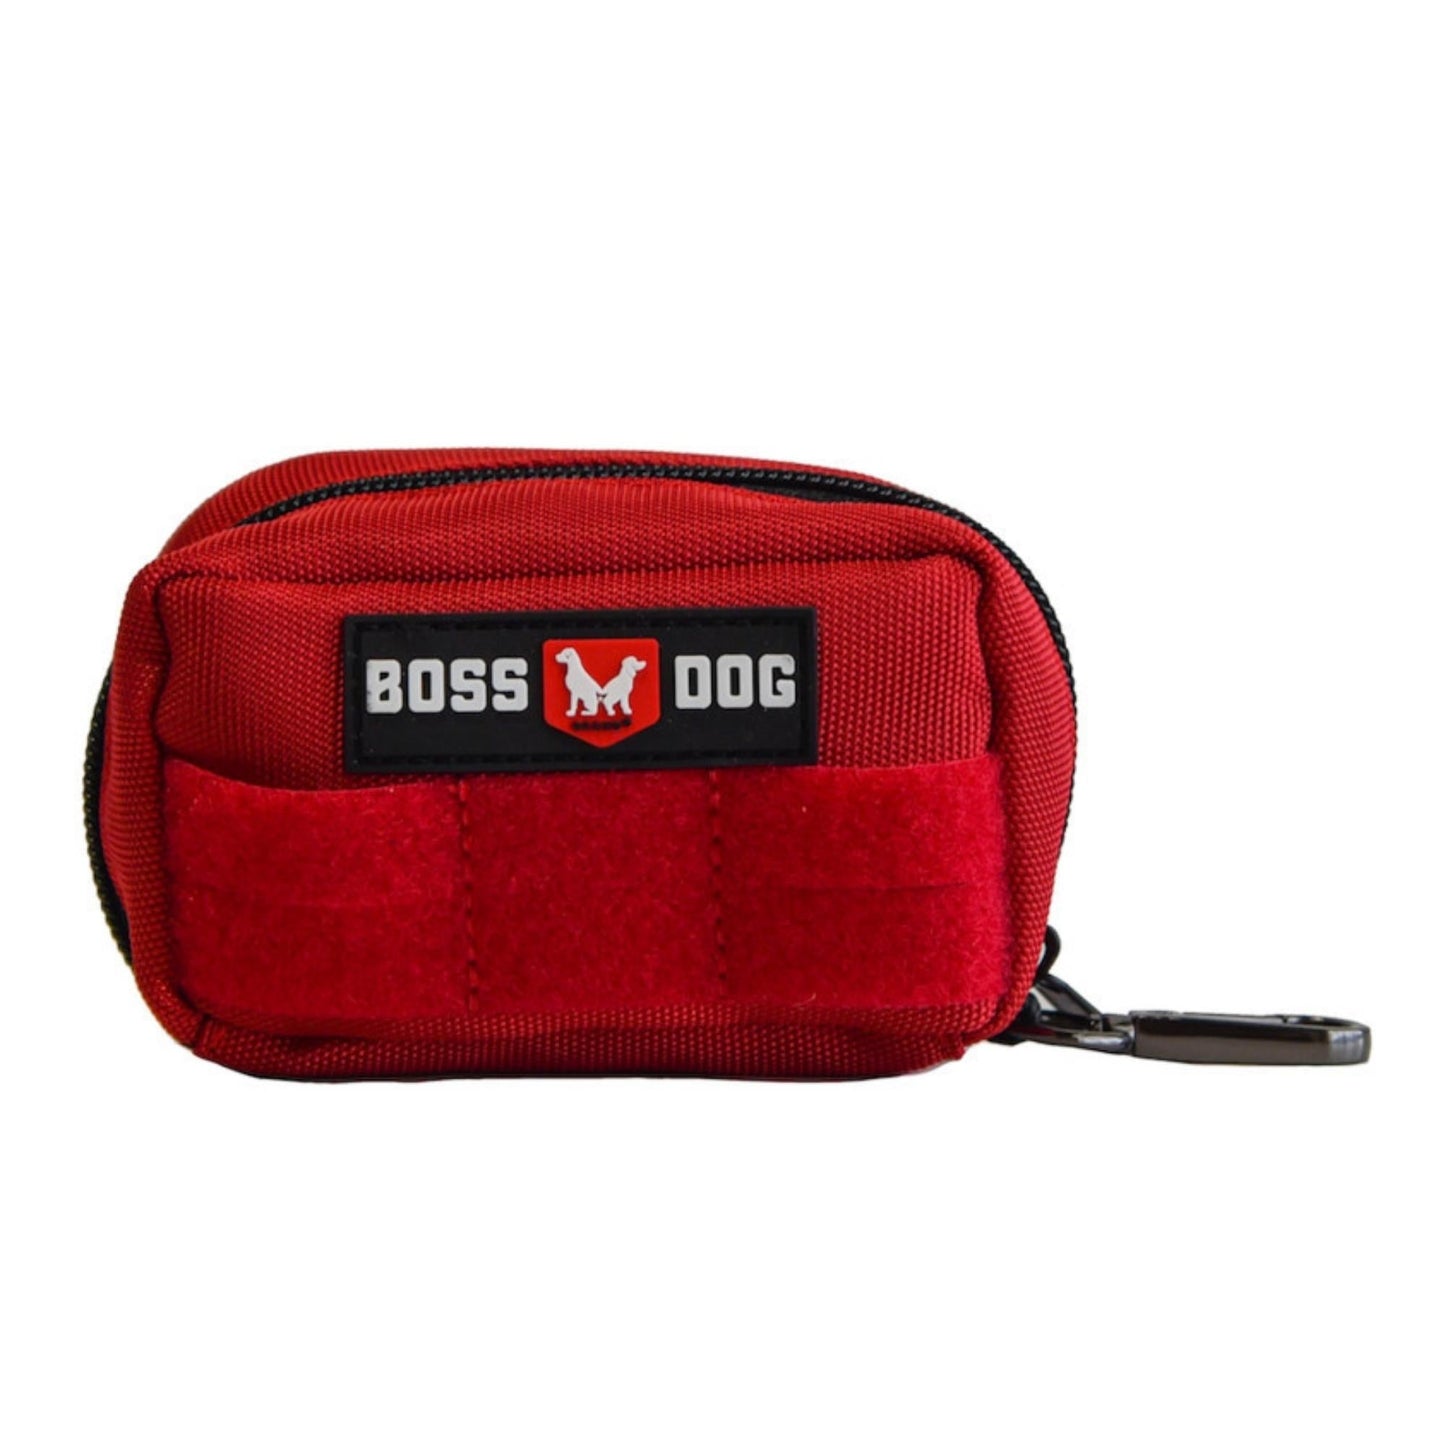 Boss Dog Tactical Molle Harness Bag Red, 1ea/Small